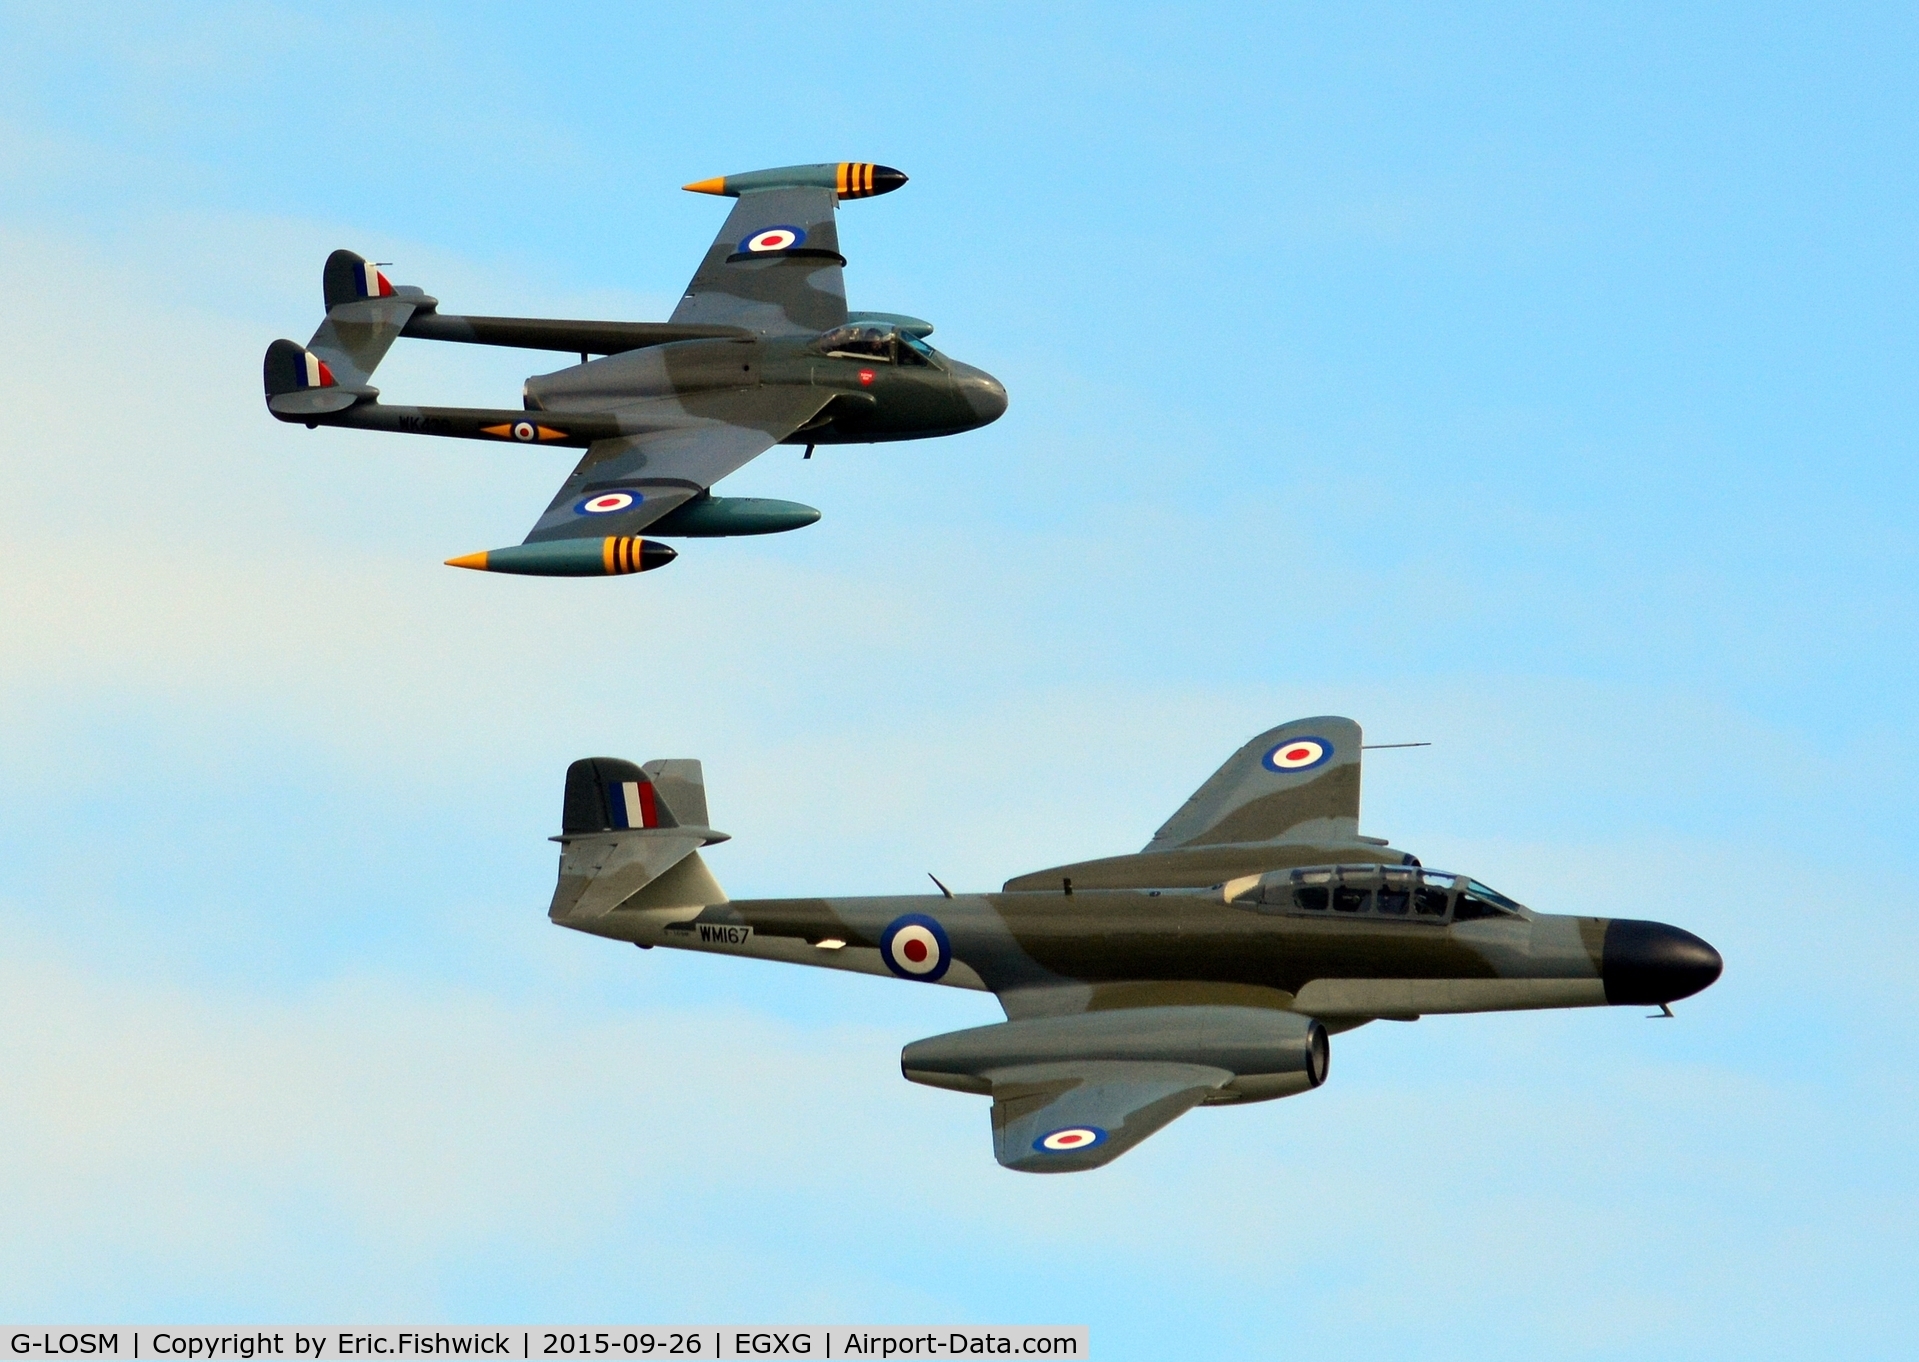 G-LOSM, 1952 Gloster Meteor NF.11 C/N S4/U/2342, 45. WM167 and the Venom at The Yorkshire Air Show, Church Fenton, Sept. 2015.